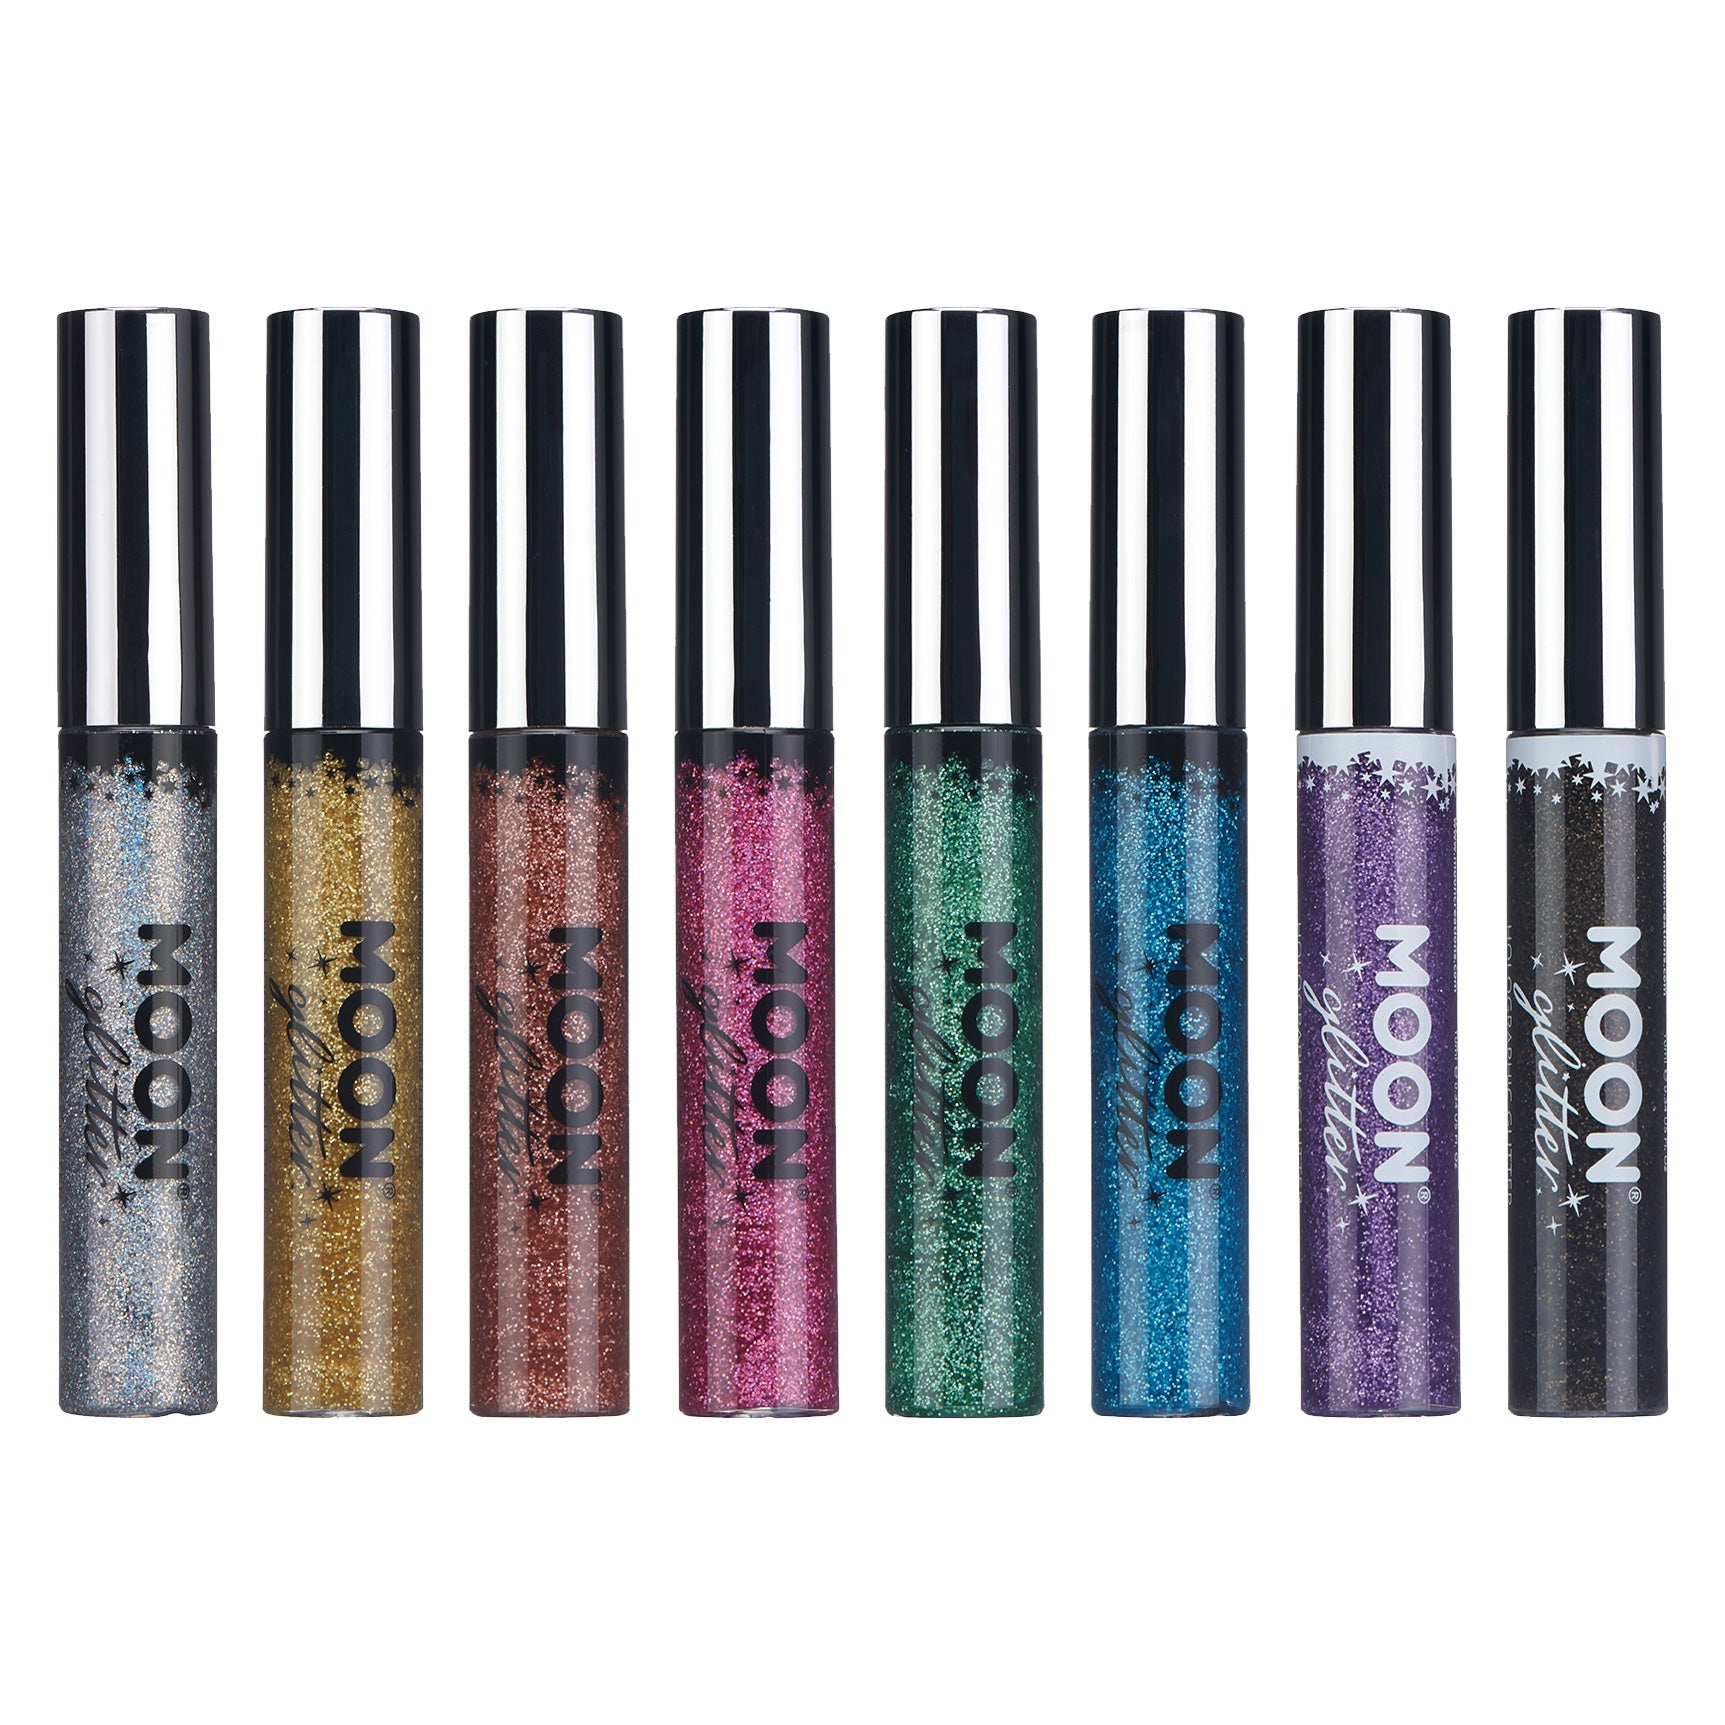 Holographic Glitter Eyeliner. Cosmetically certified, FDA & Health Canada compliant, cruelty free and vegan.